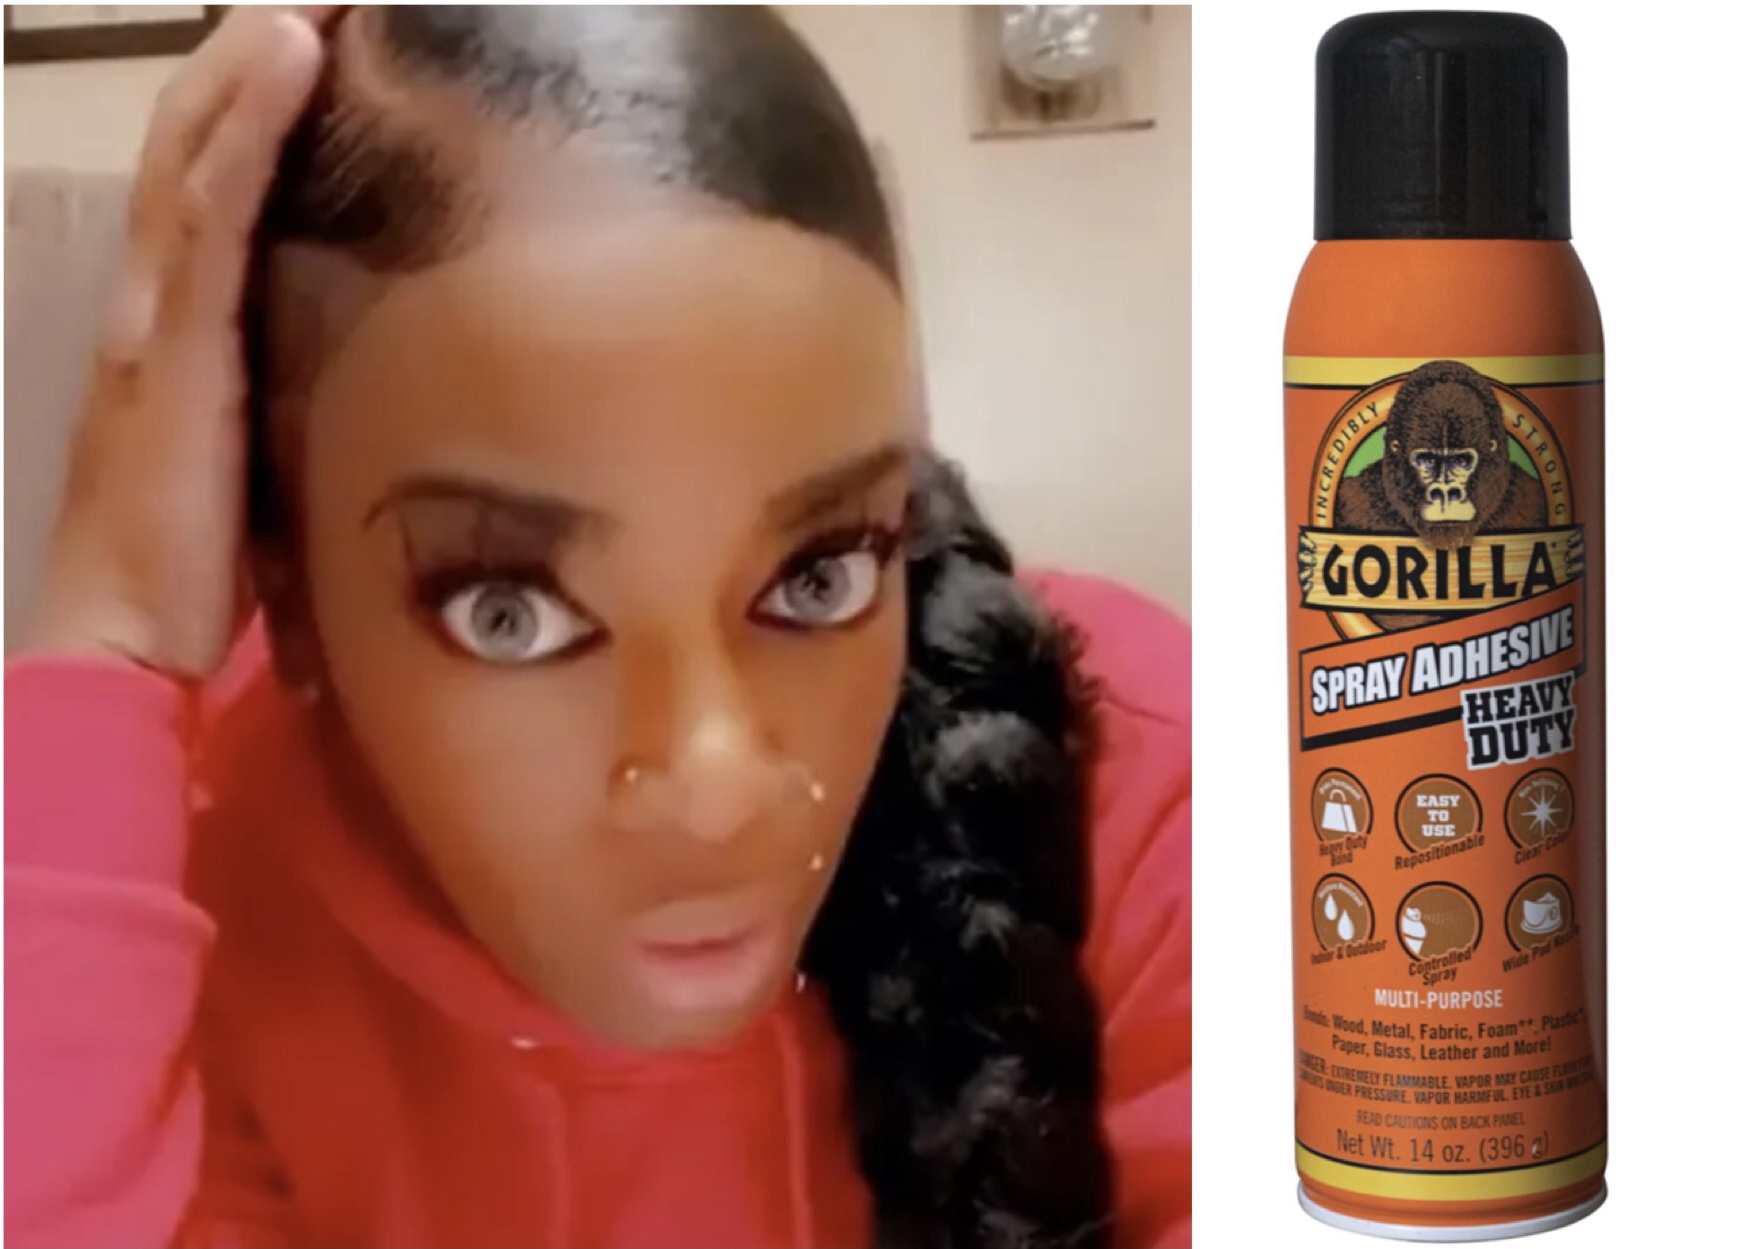 What is Gorilla Glue, the sticky subject of the viral video?